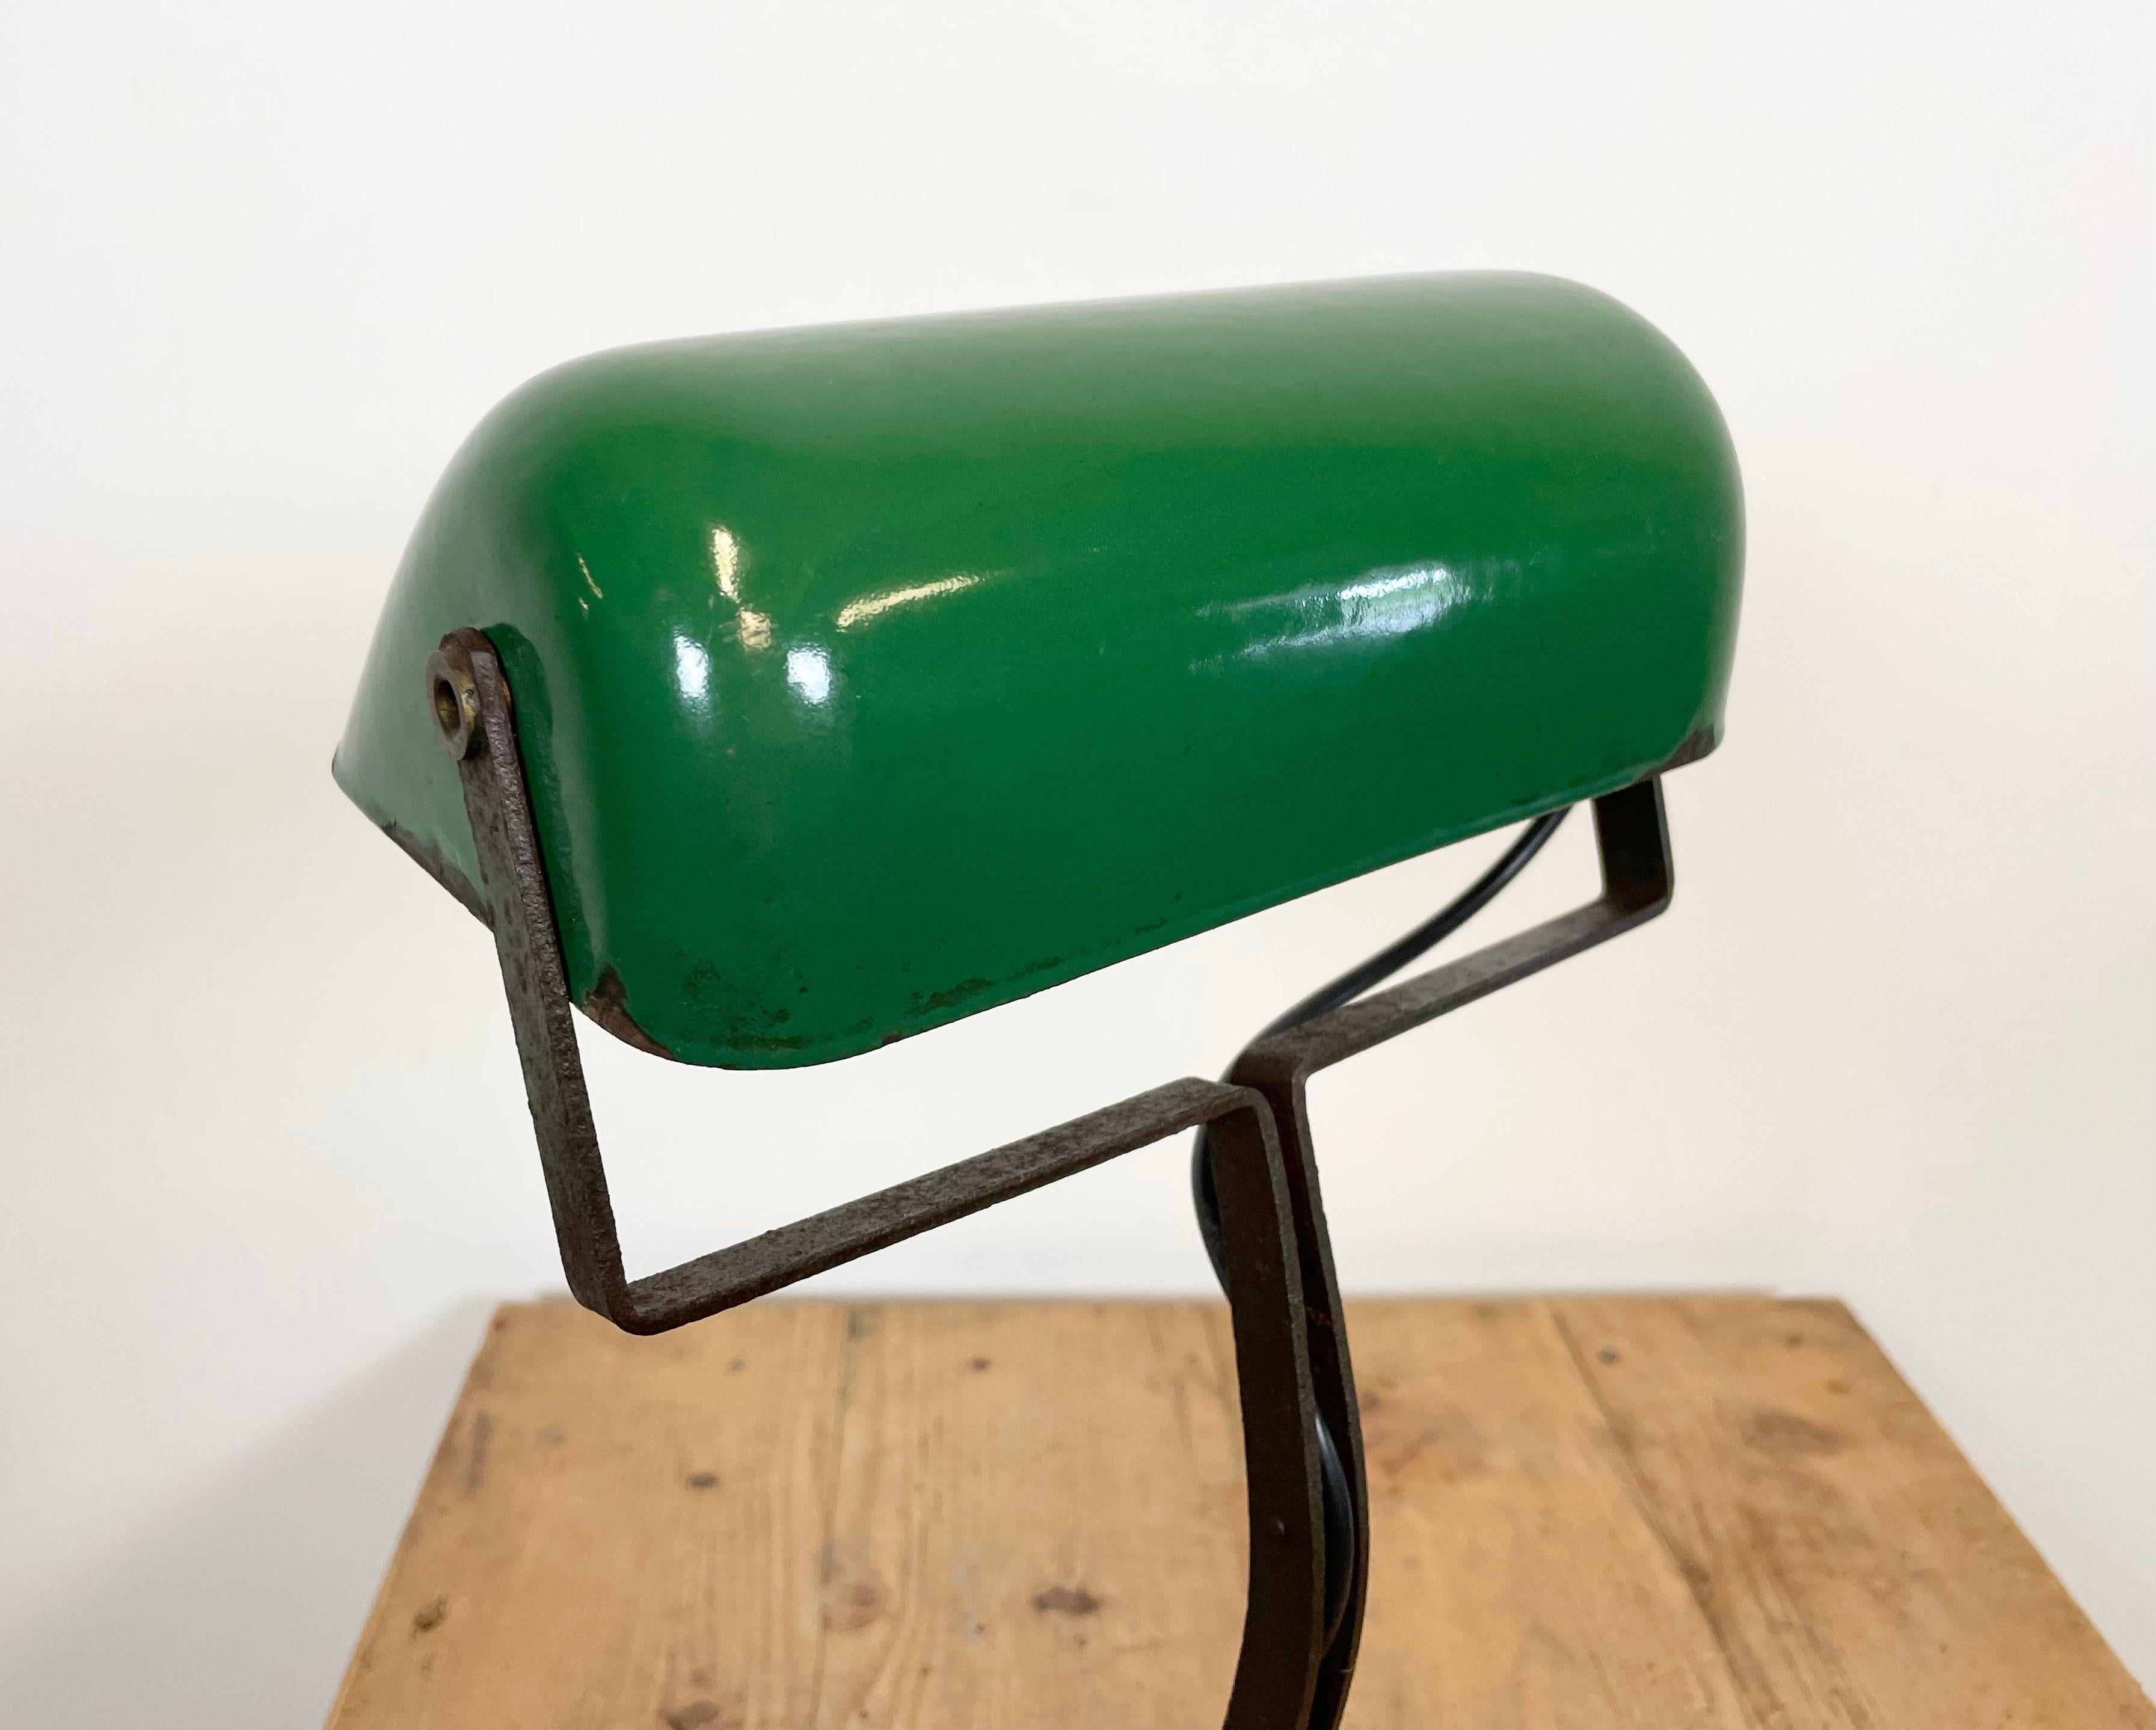 Vintage Green Enamel Bank Lamp from Astral, 1930s For Sale 3